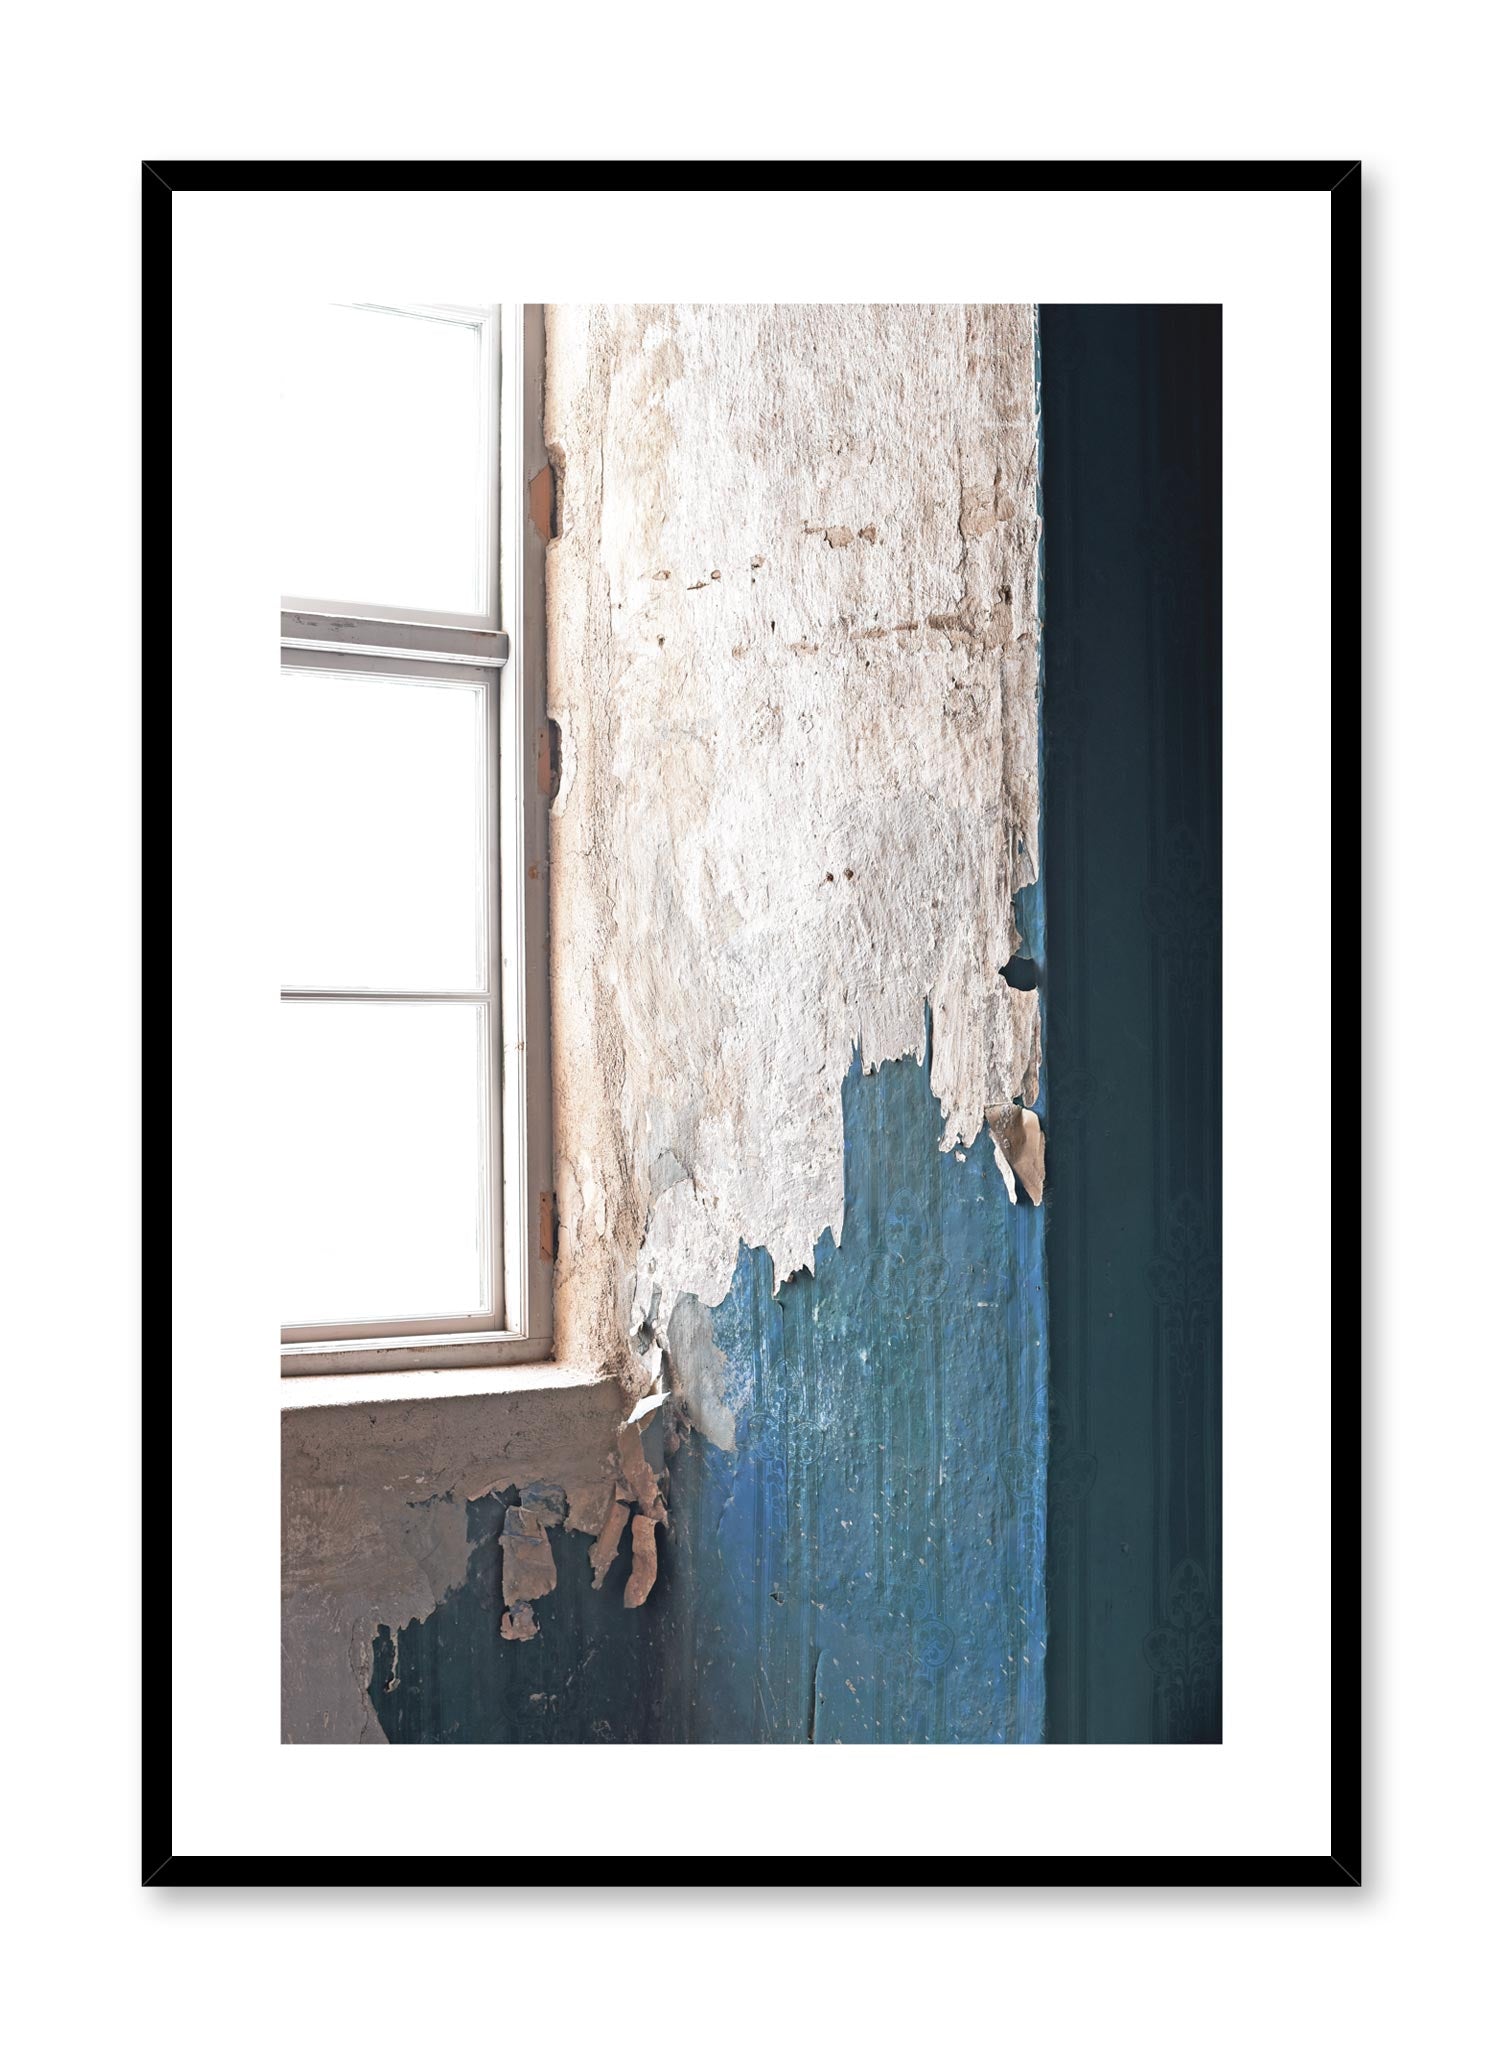 Minimalist design photography poster of peeling paint by Love Warriors Creative Studio - Buy at Opposite Wall